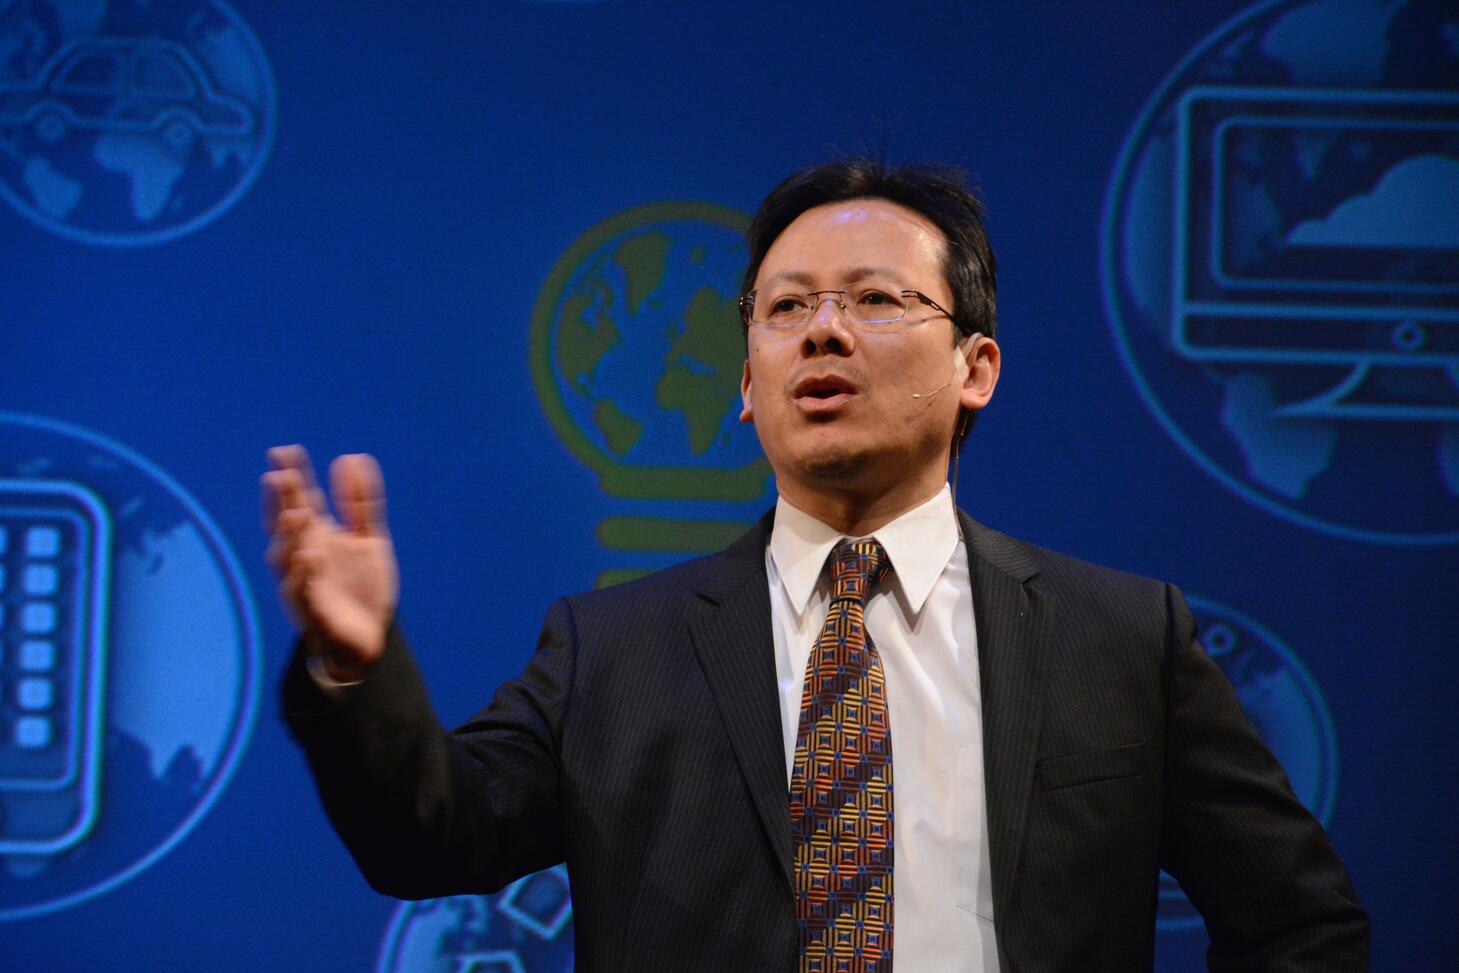 Michel Pham delivers a lecture during the annual BRITE conference